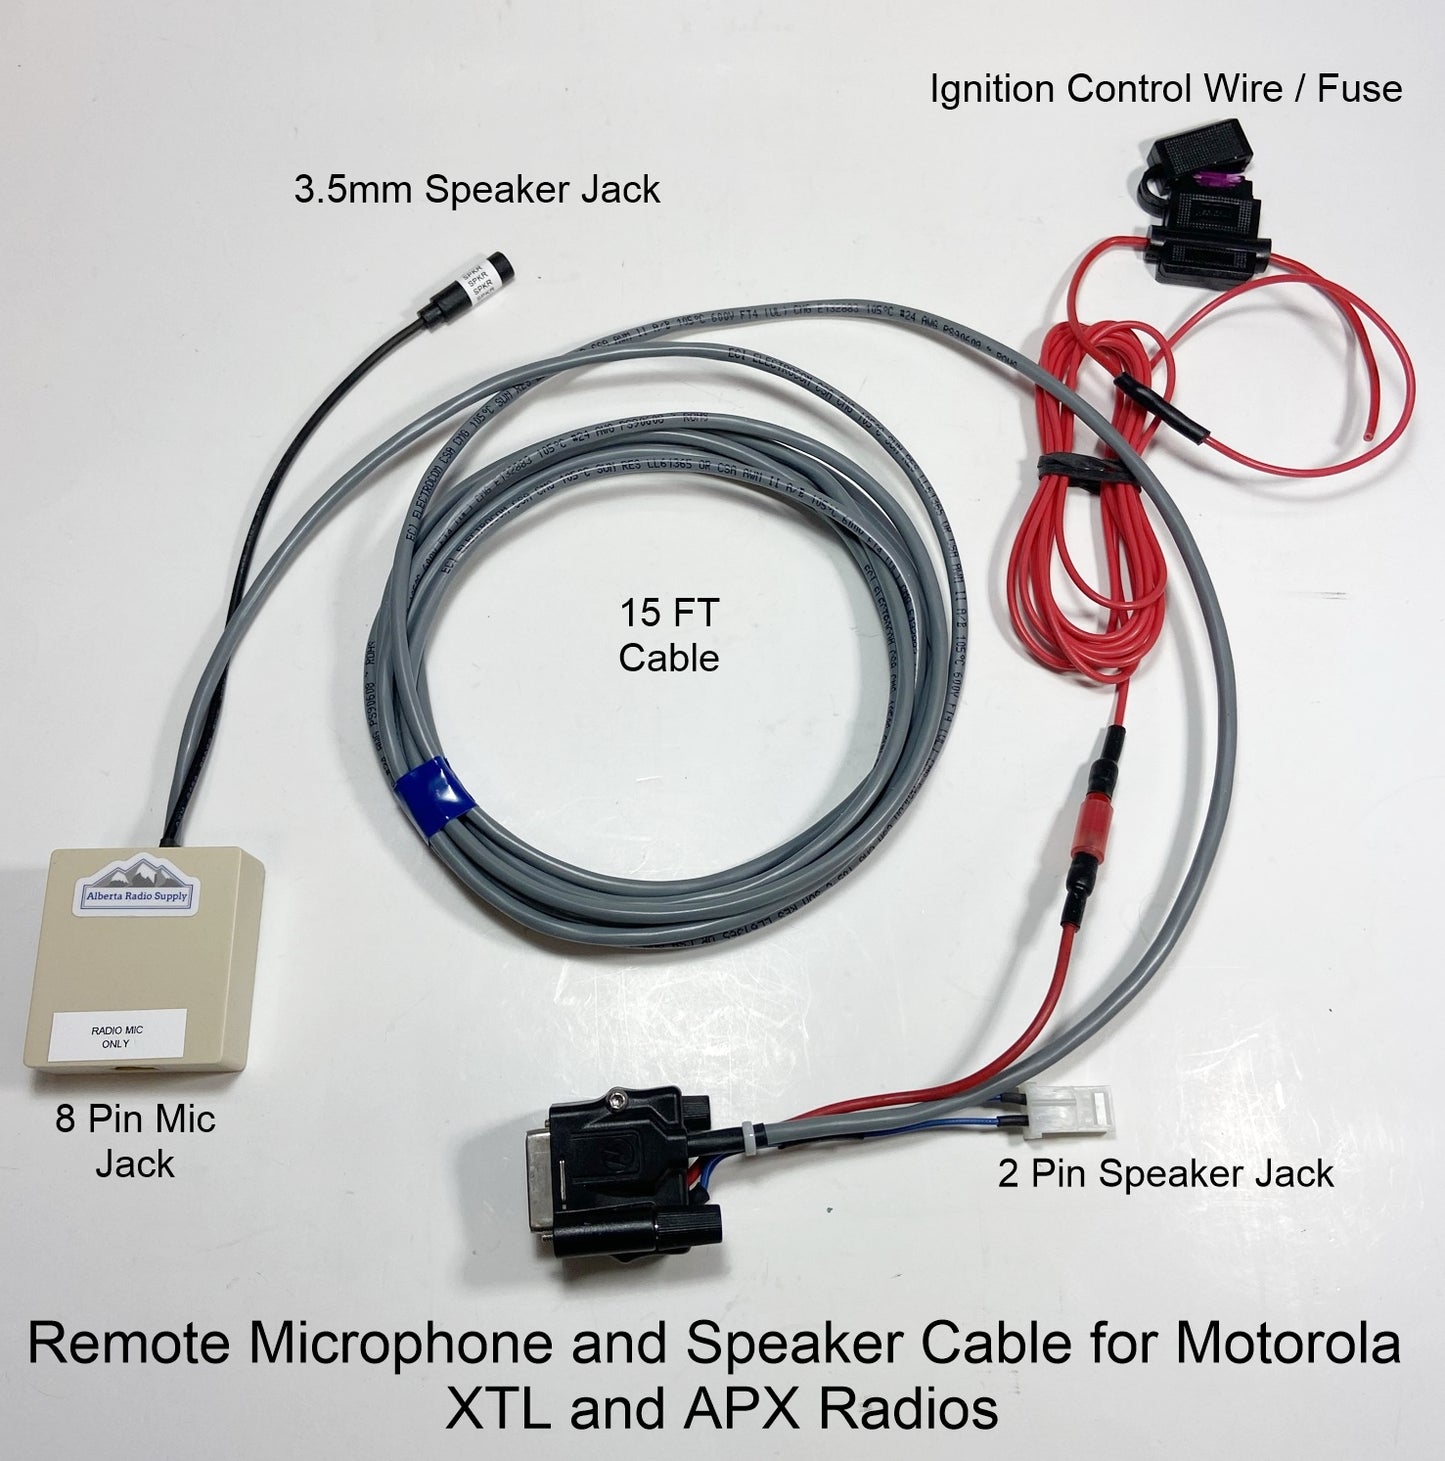 Remote Microphone and Speaker Kit - Motorola XTL and APX Mobiles